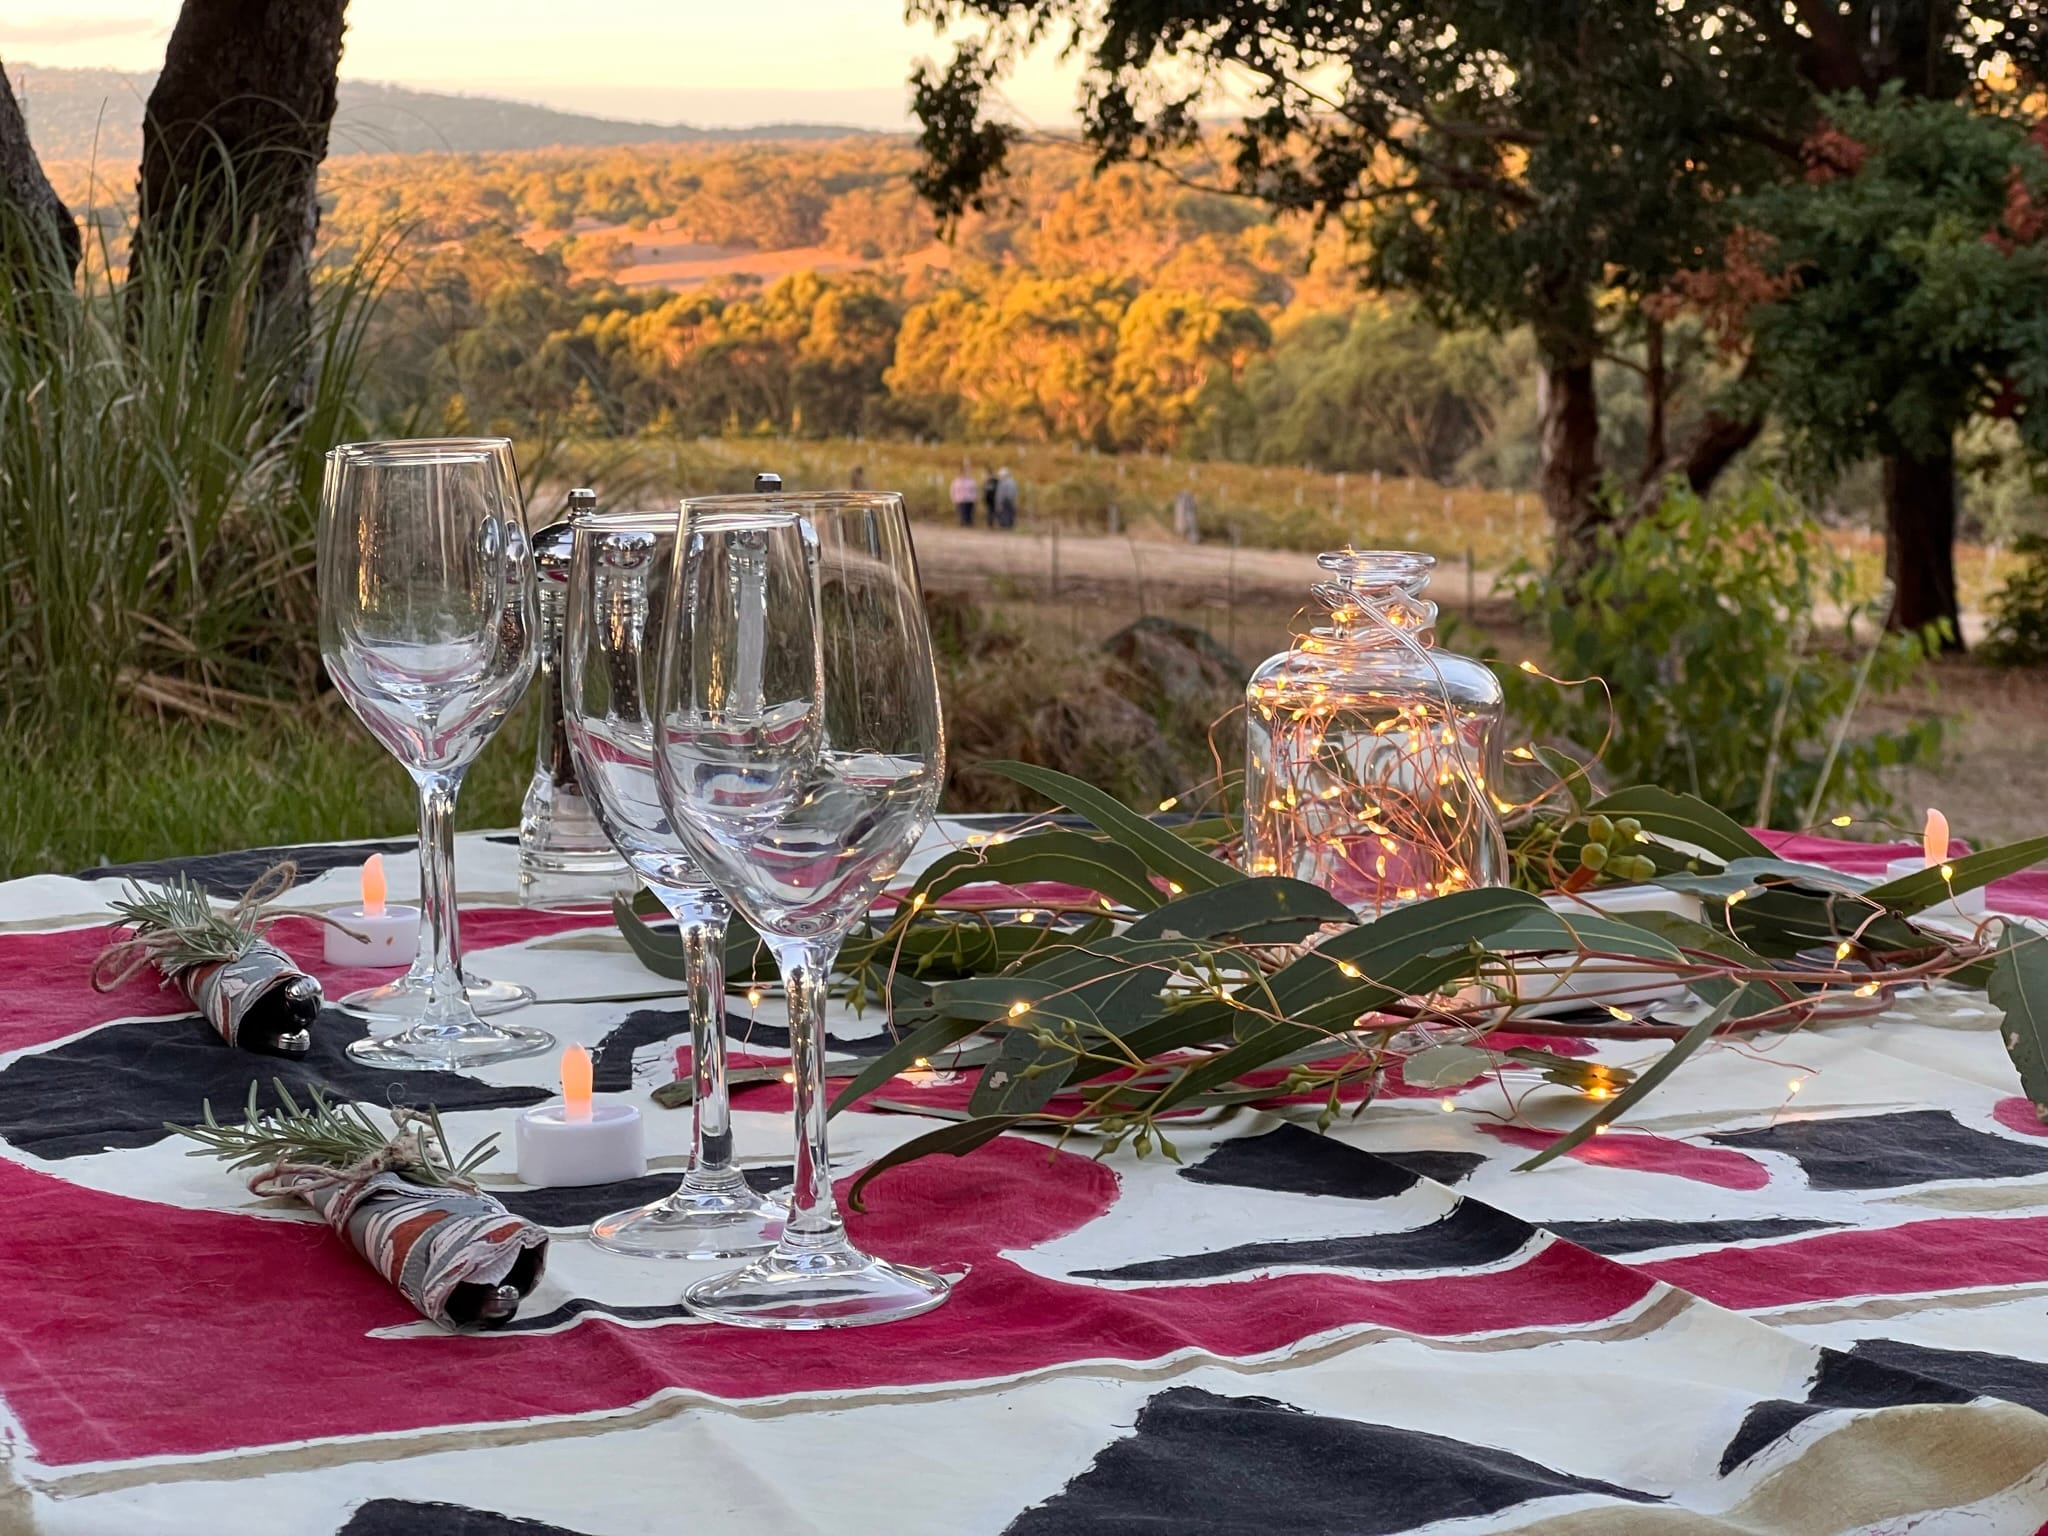 Picnic and wine at sunset overlooking the vines and hills